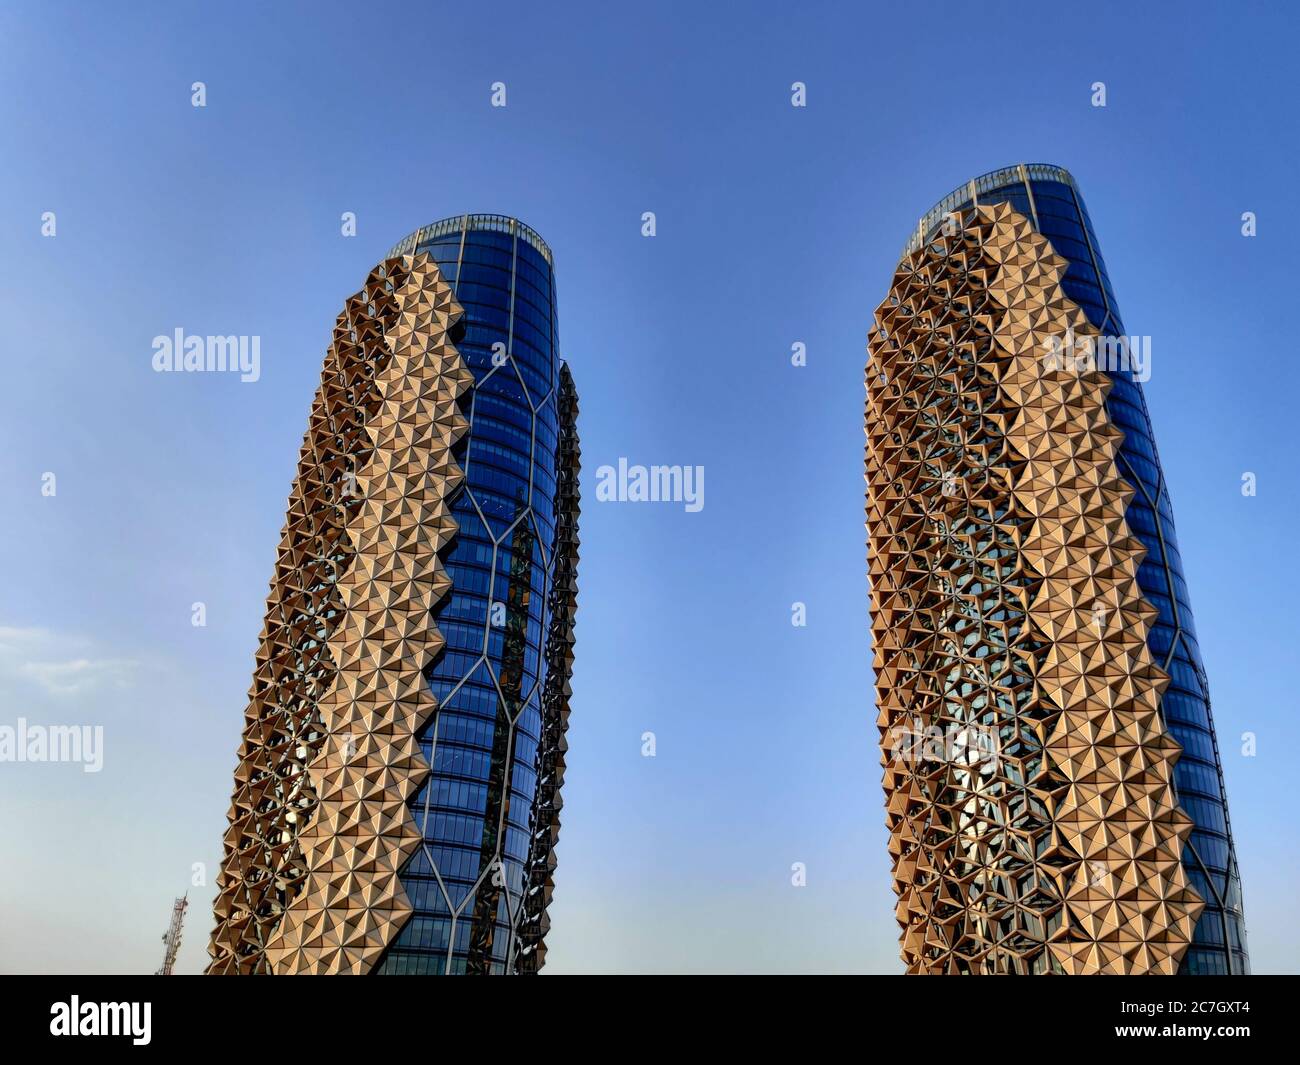 Unique and modern building | Abu Dhabi city famous and iconic landmarks, Al Bahr Towers in UAE Stock Photo